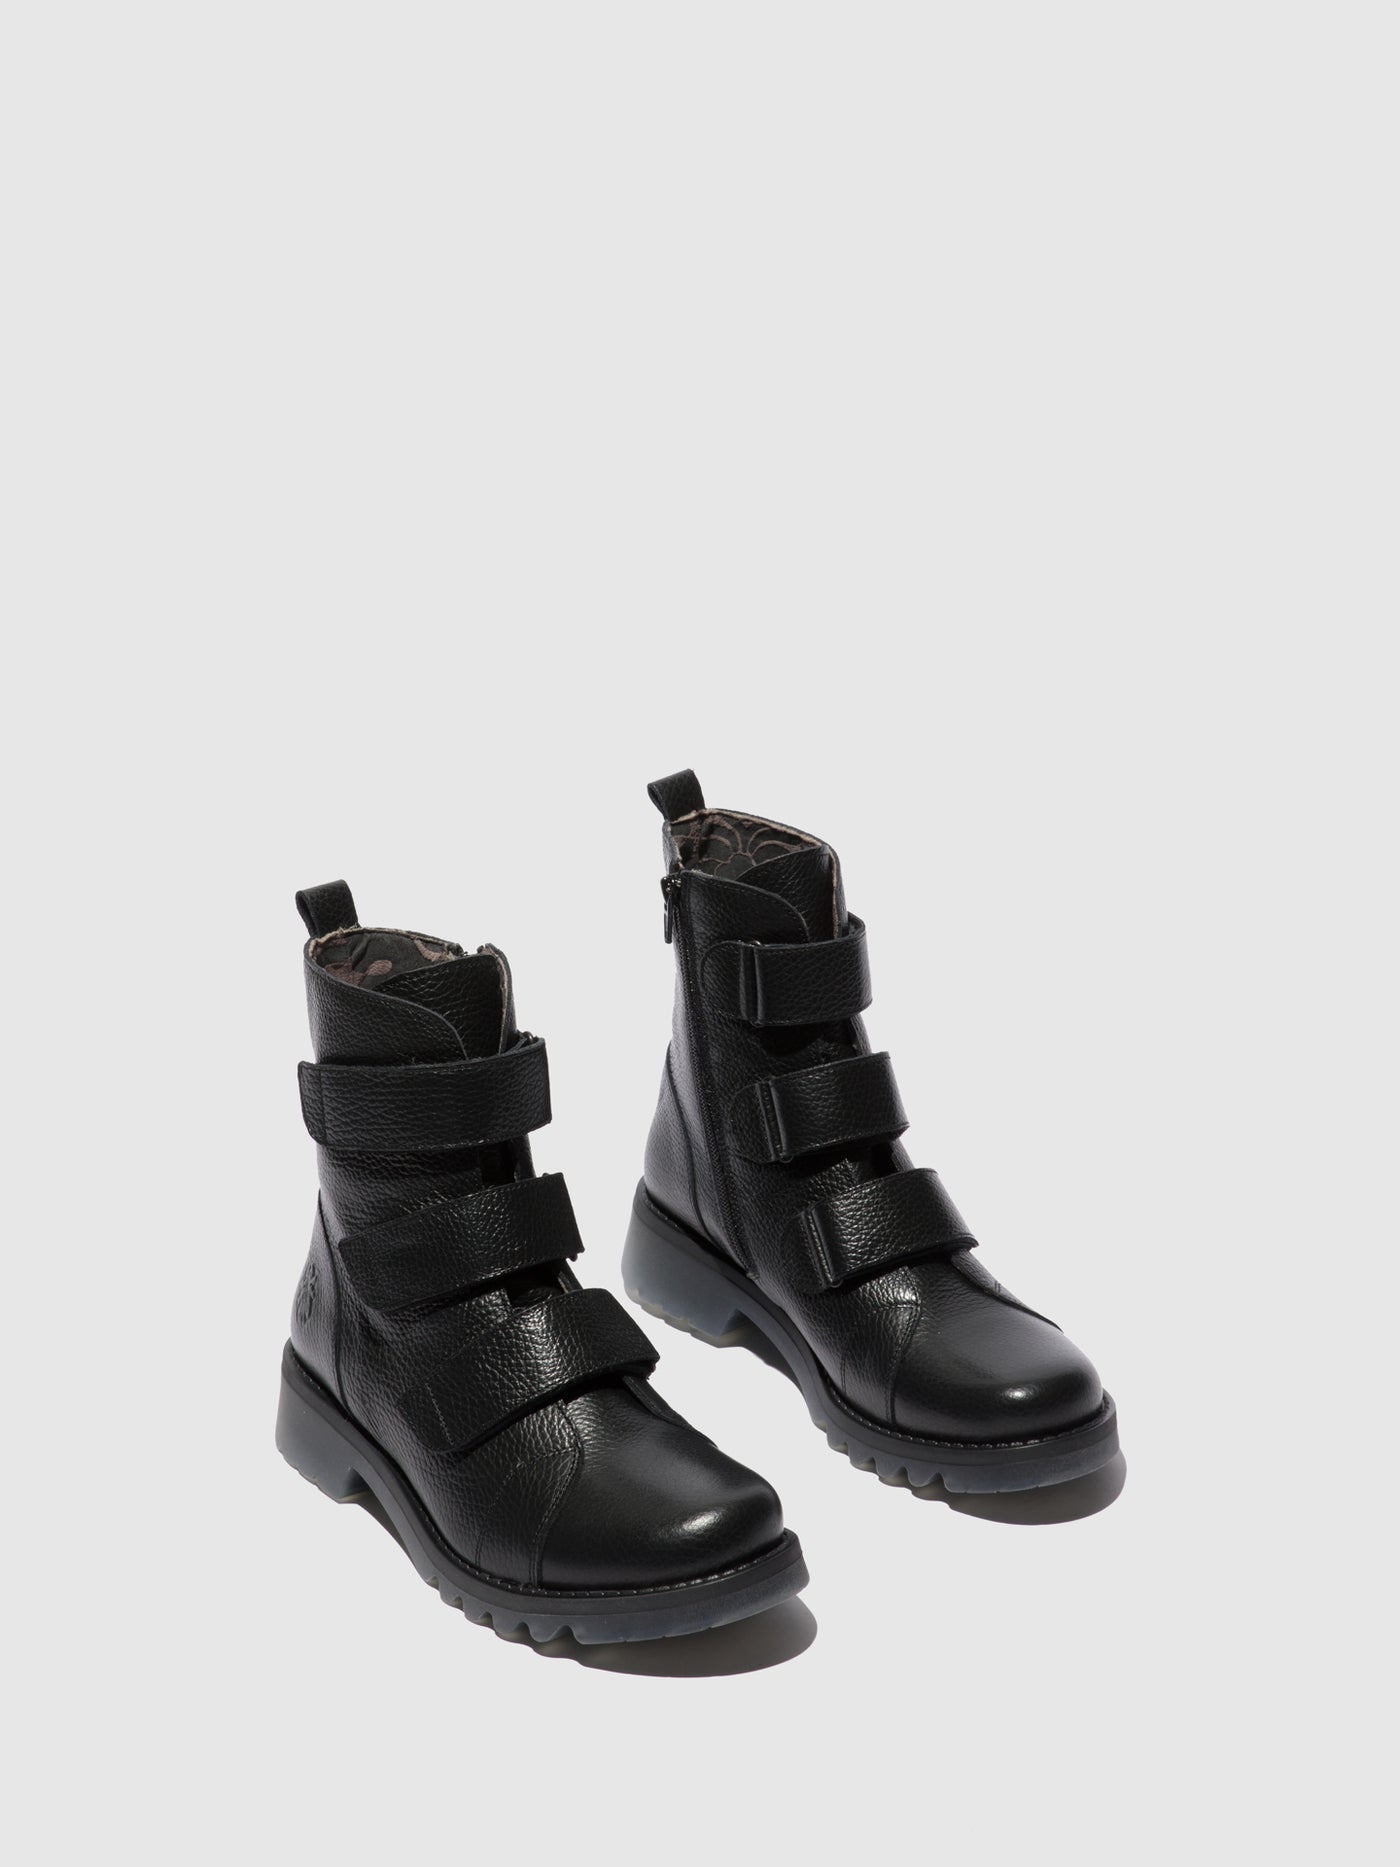 Velcro Ankle Boots RACH790FLY RIO BLACK